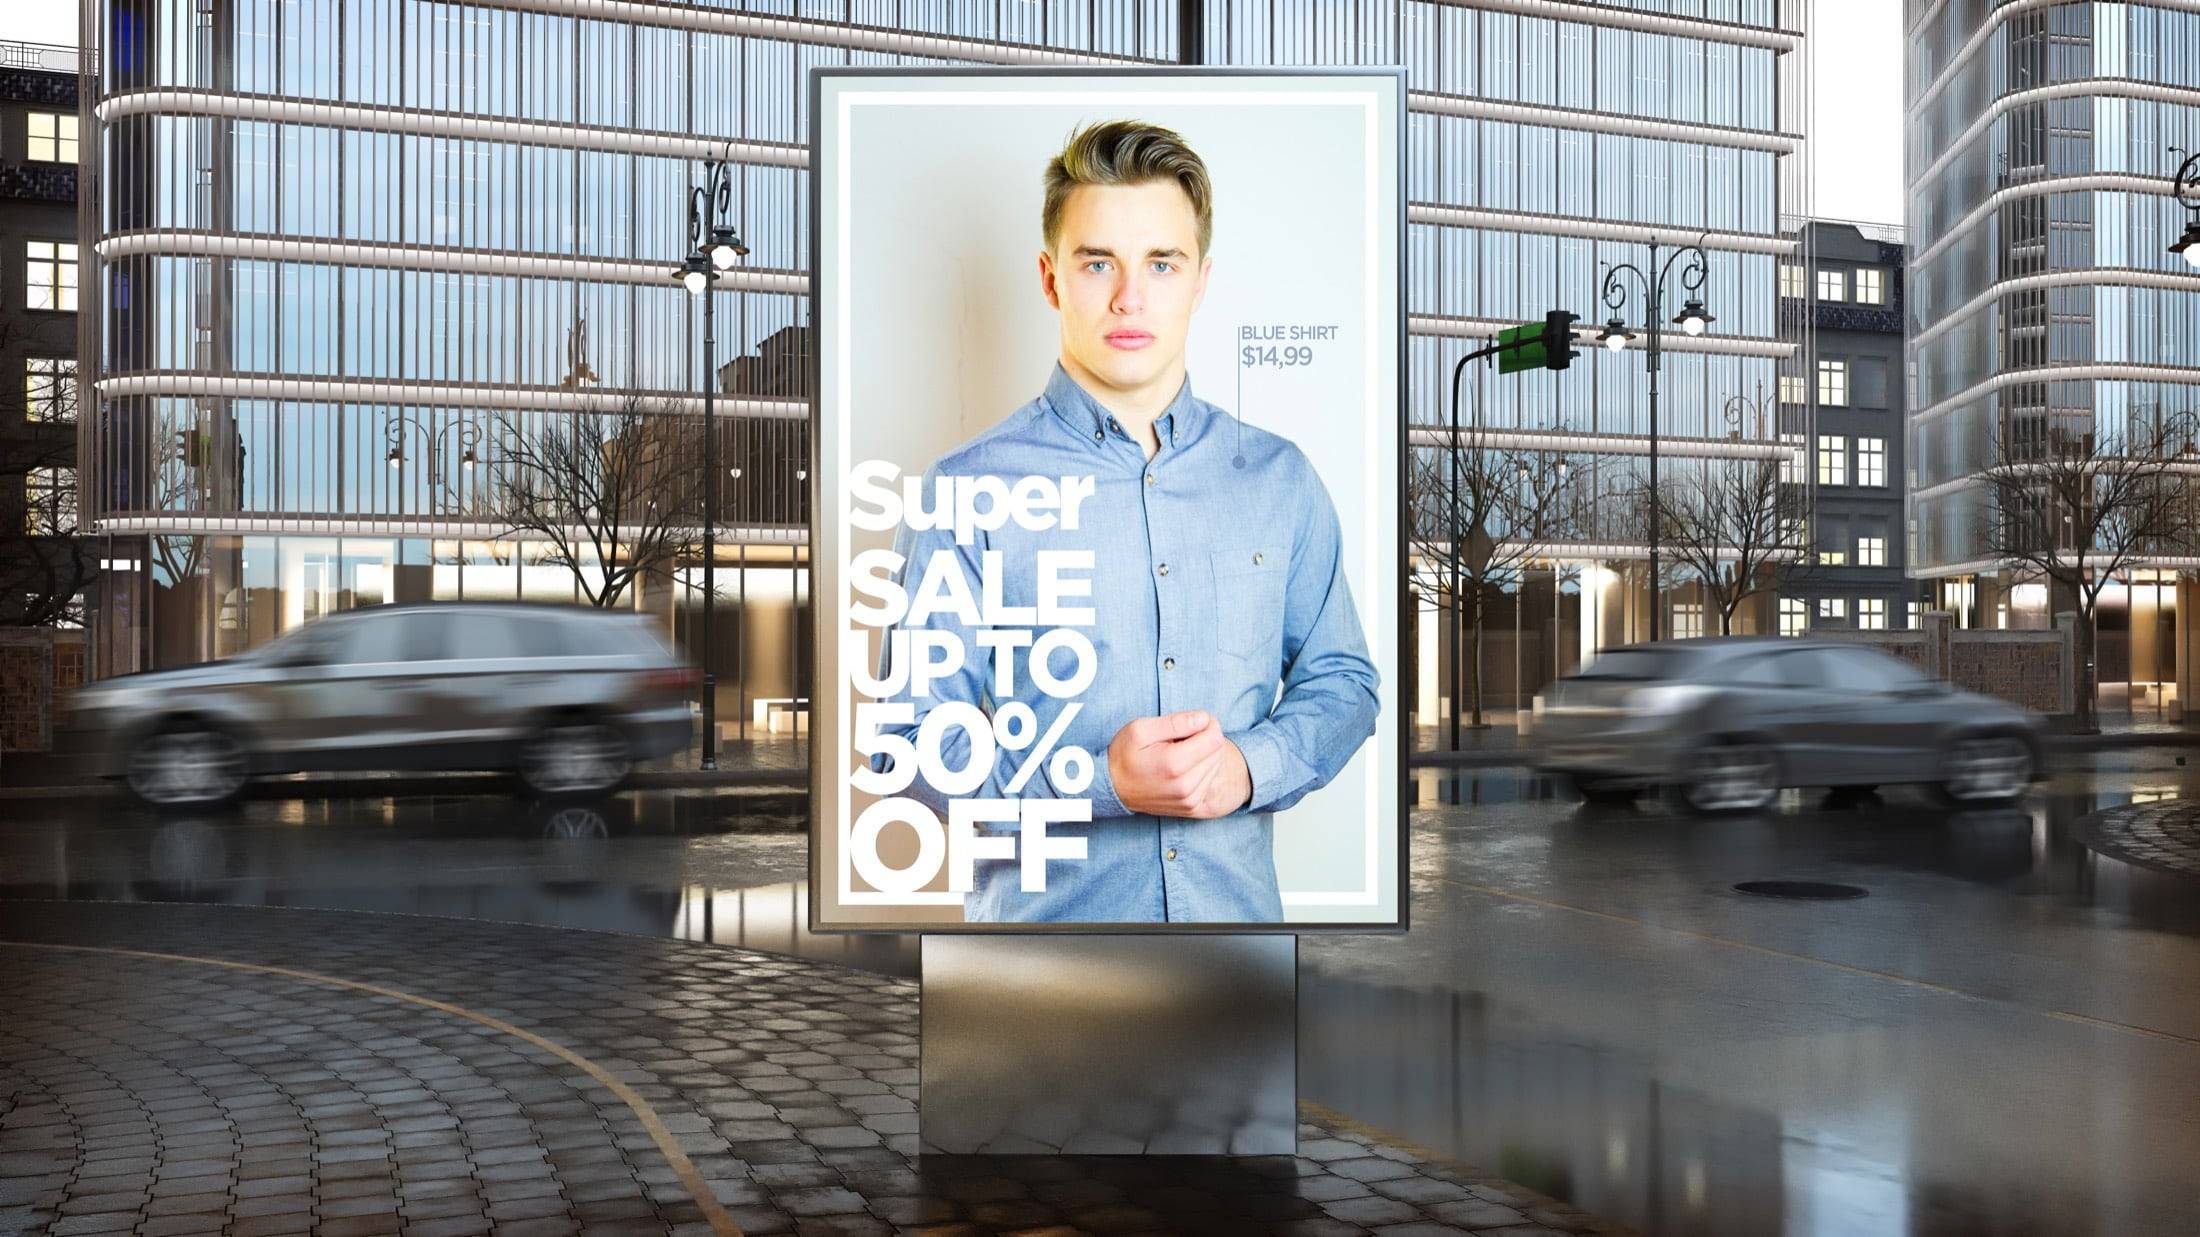 Digital billboard displaying a shirt advertisement beside a road with passing cars.